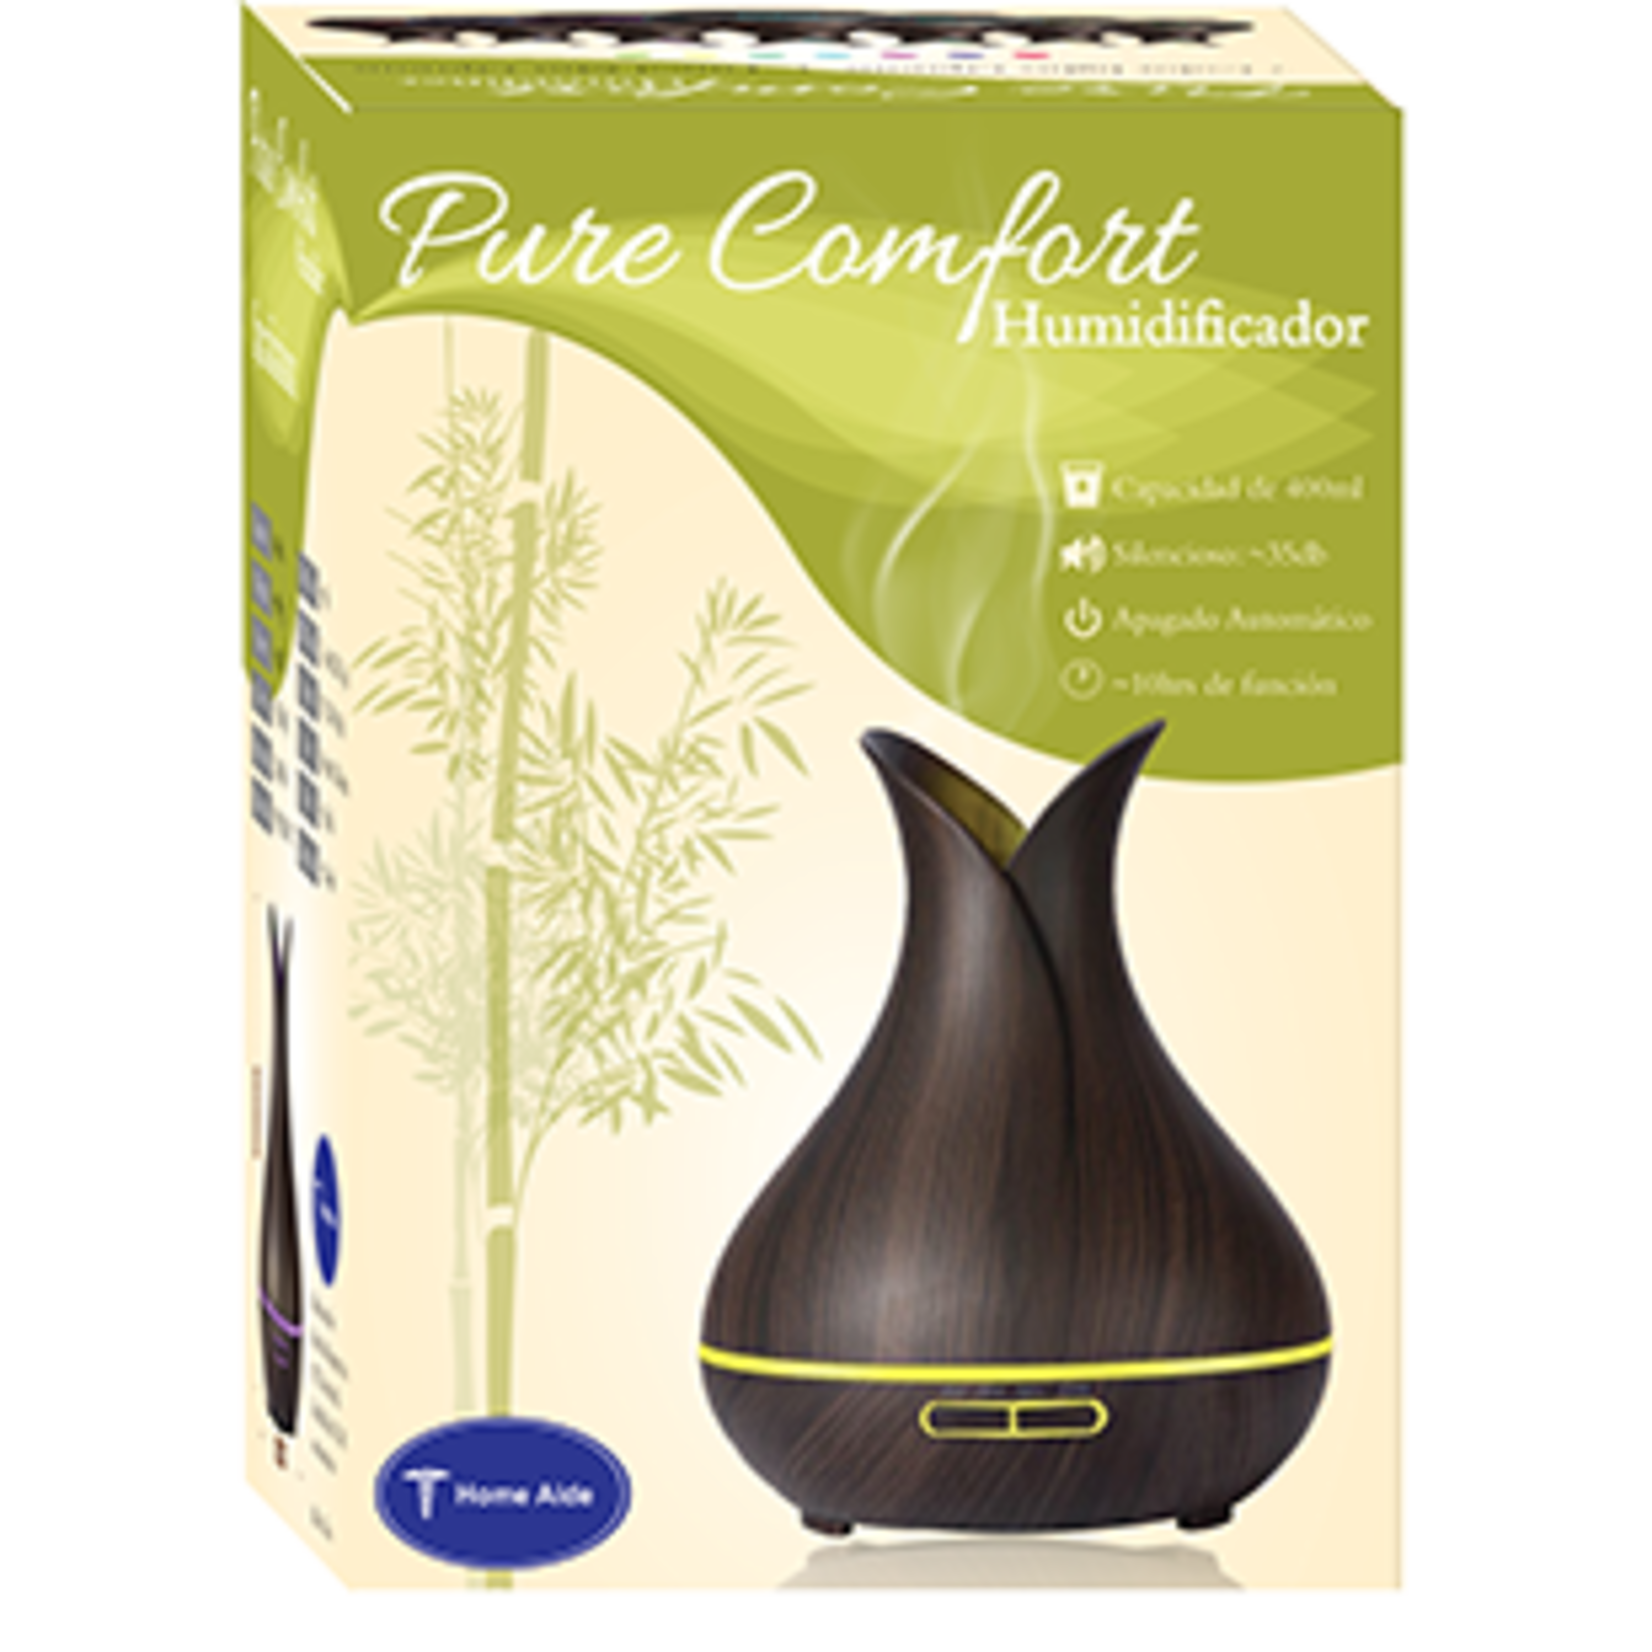 Home Aide Pure Comfort Humidifier - NDC# 50632-0007-24